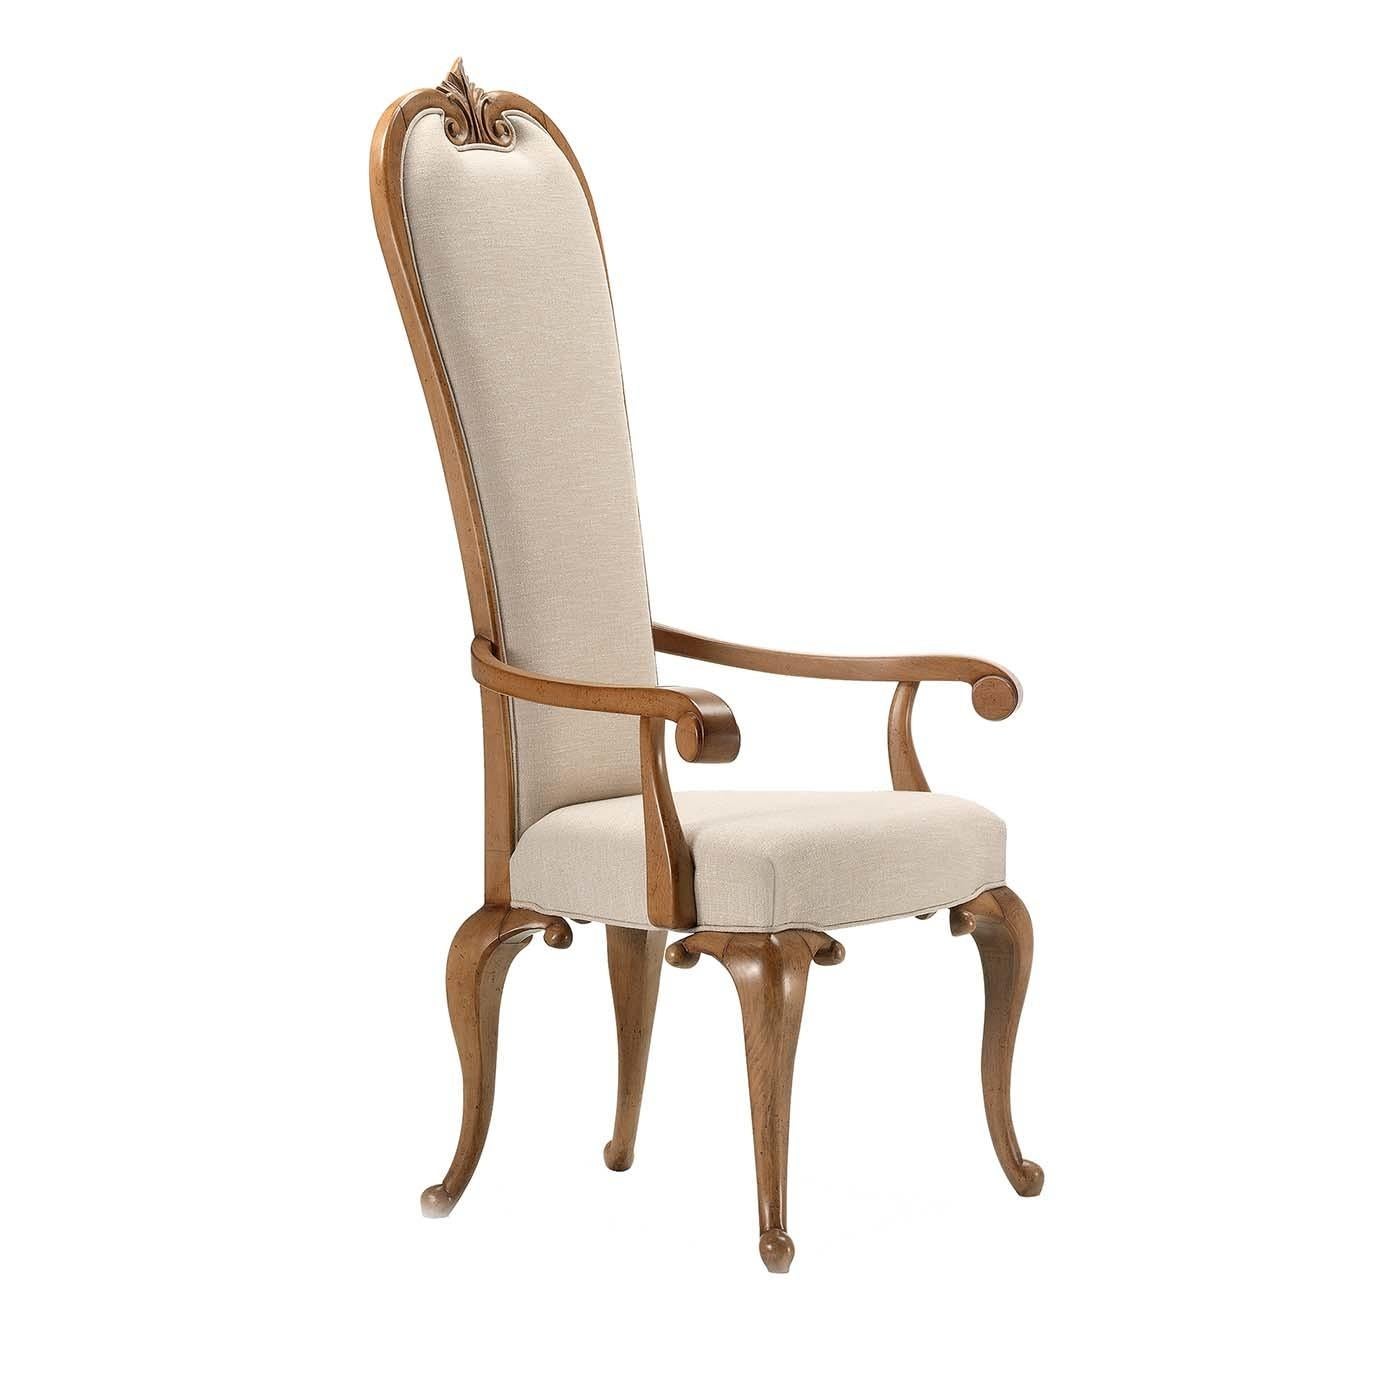 Italian Cabriole Chair with Armrests